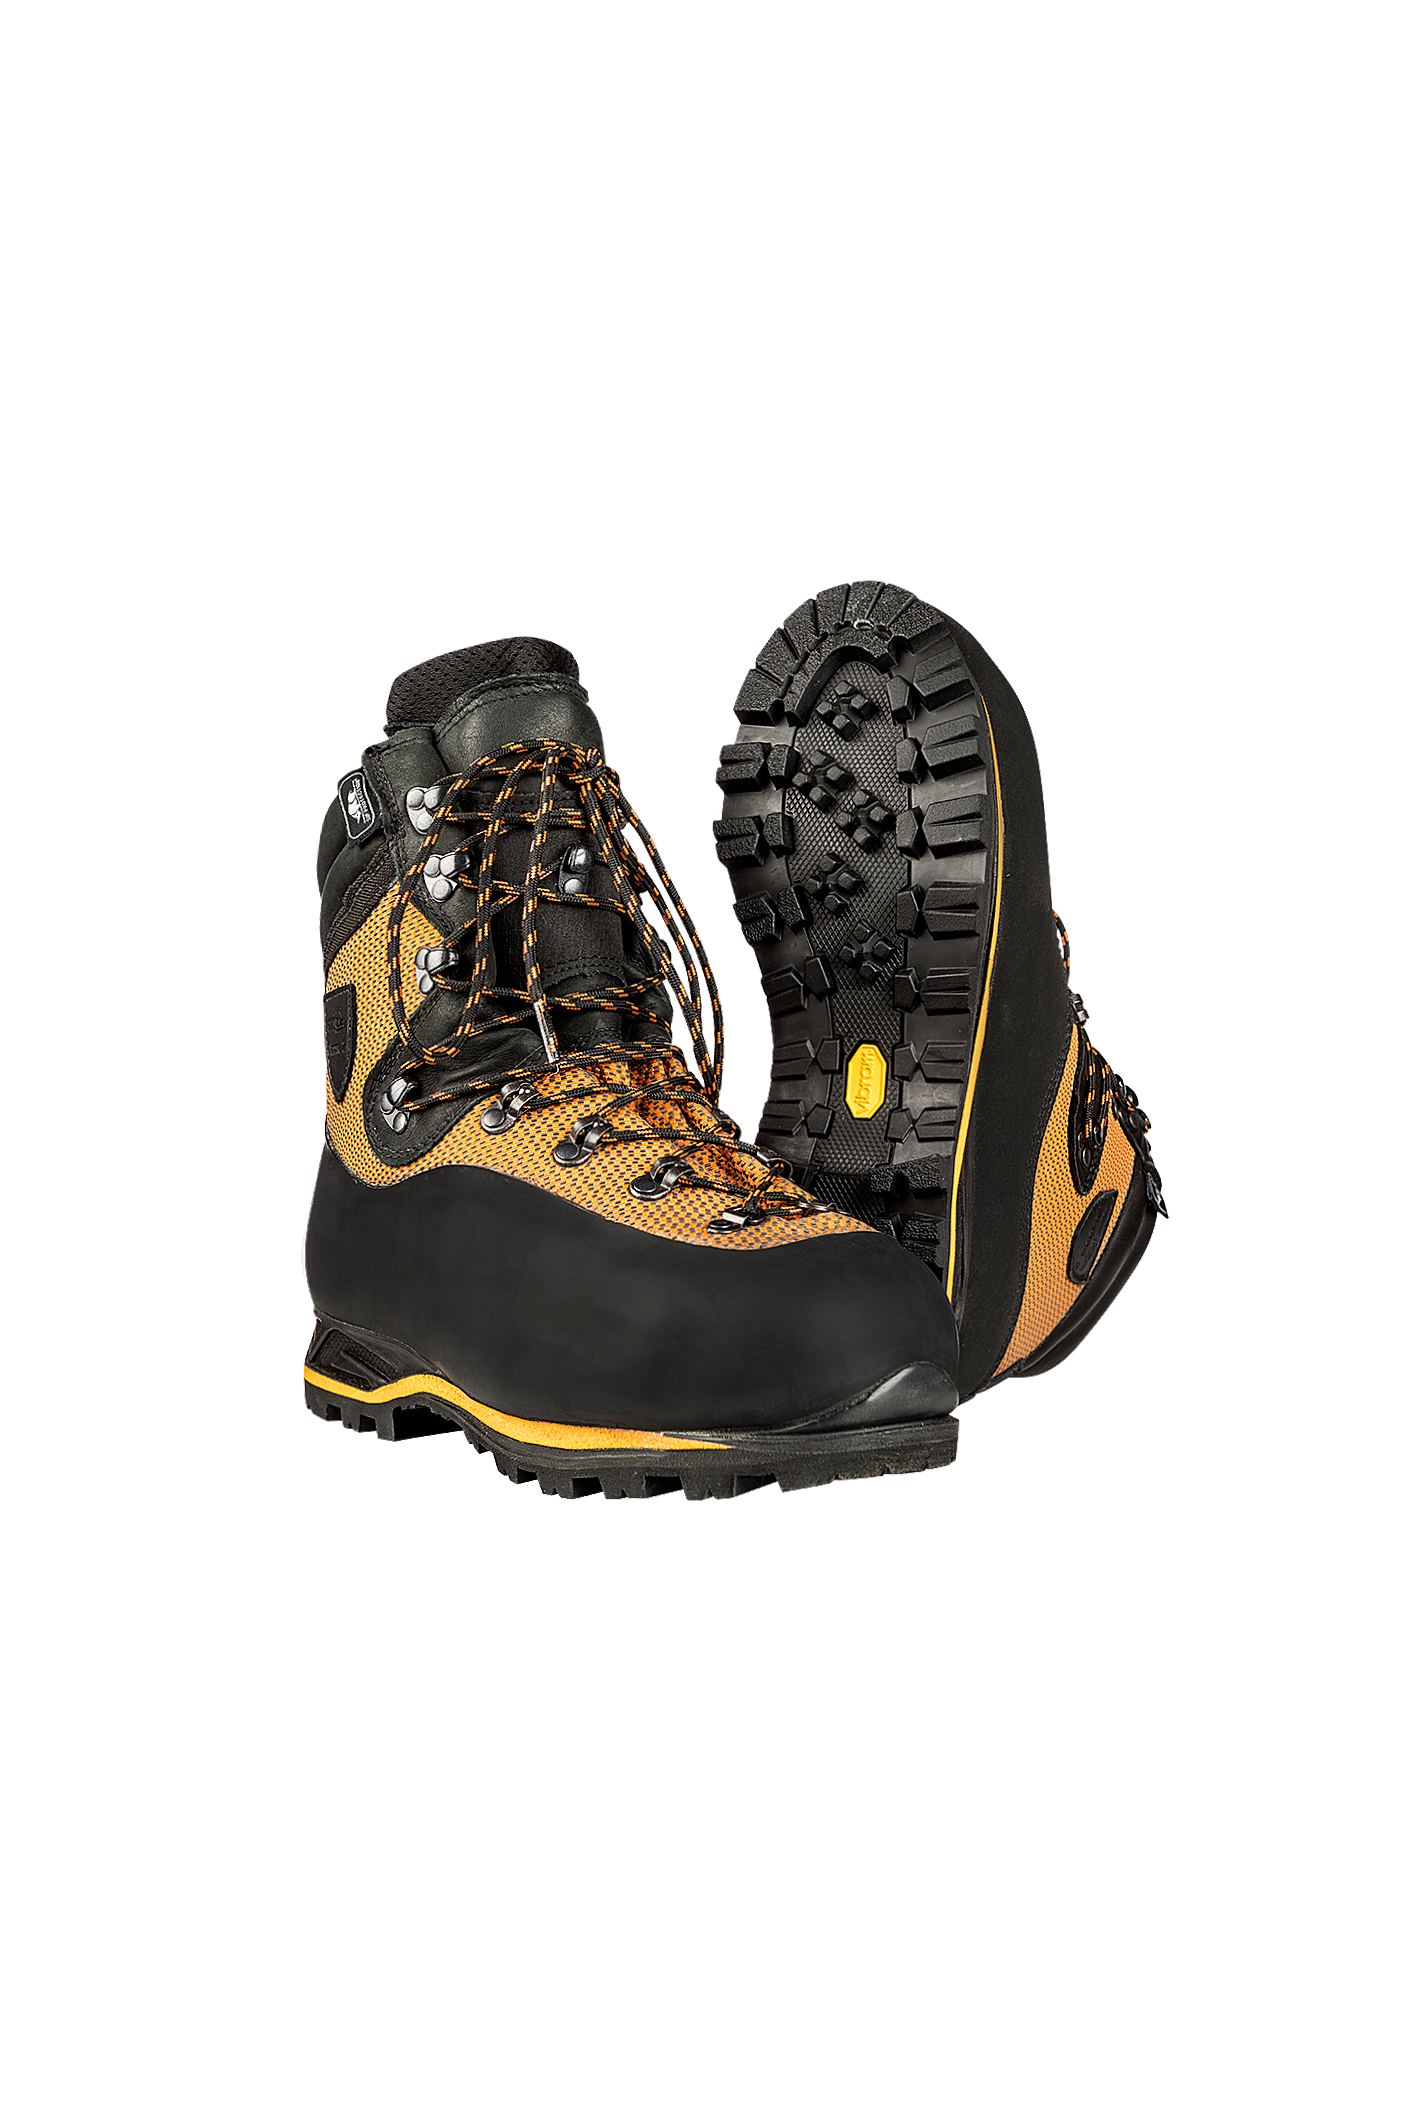 Sip Protection - Grizzly 2.0 Forstschuh